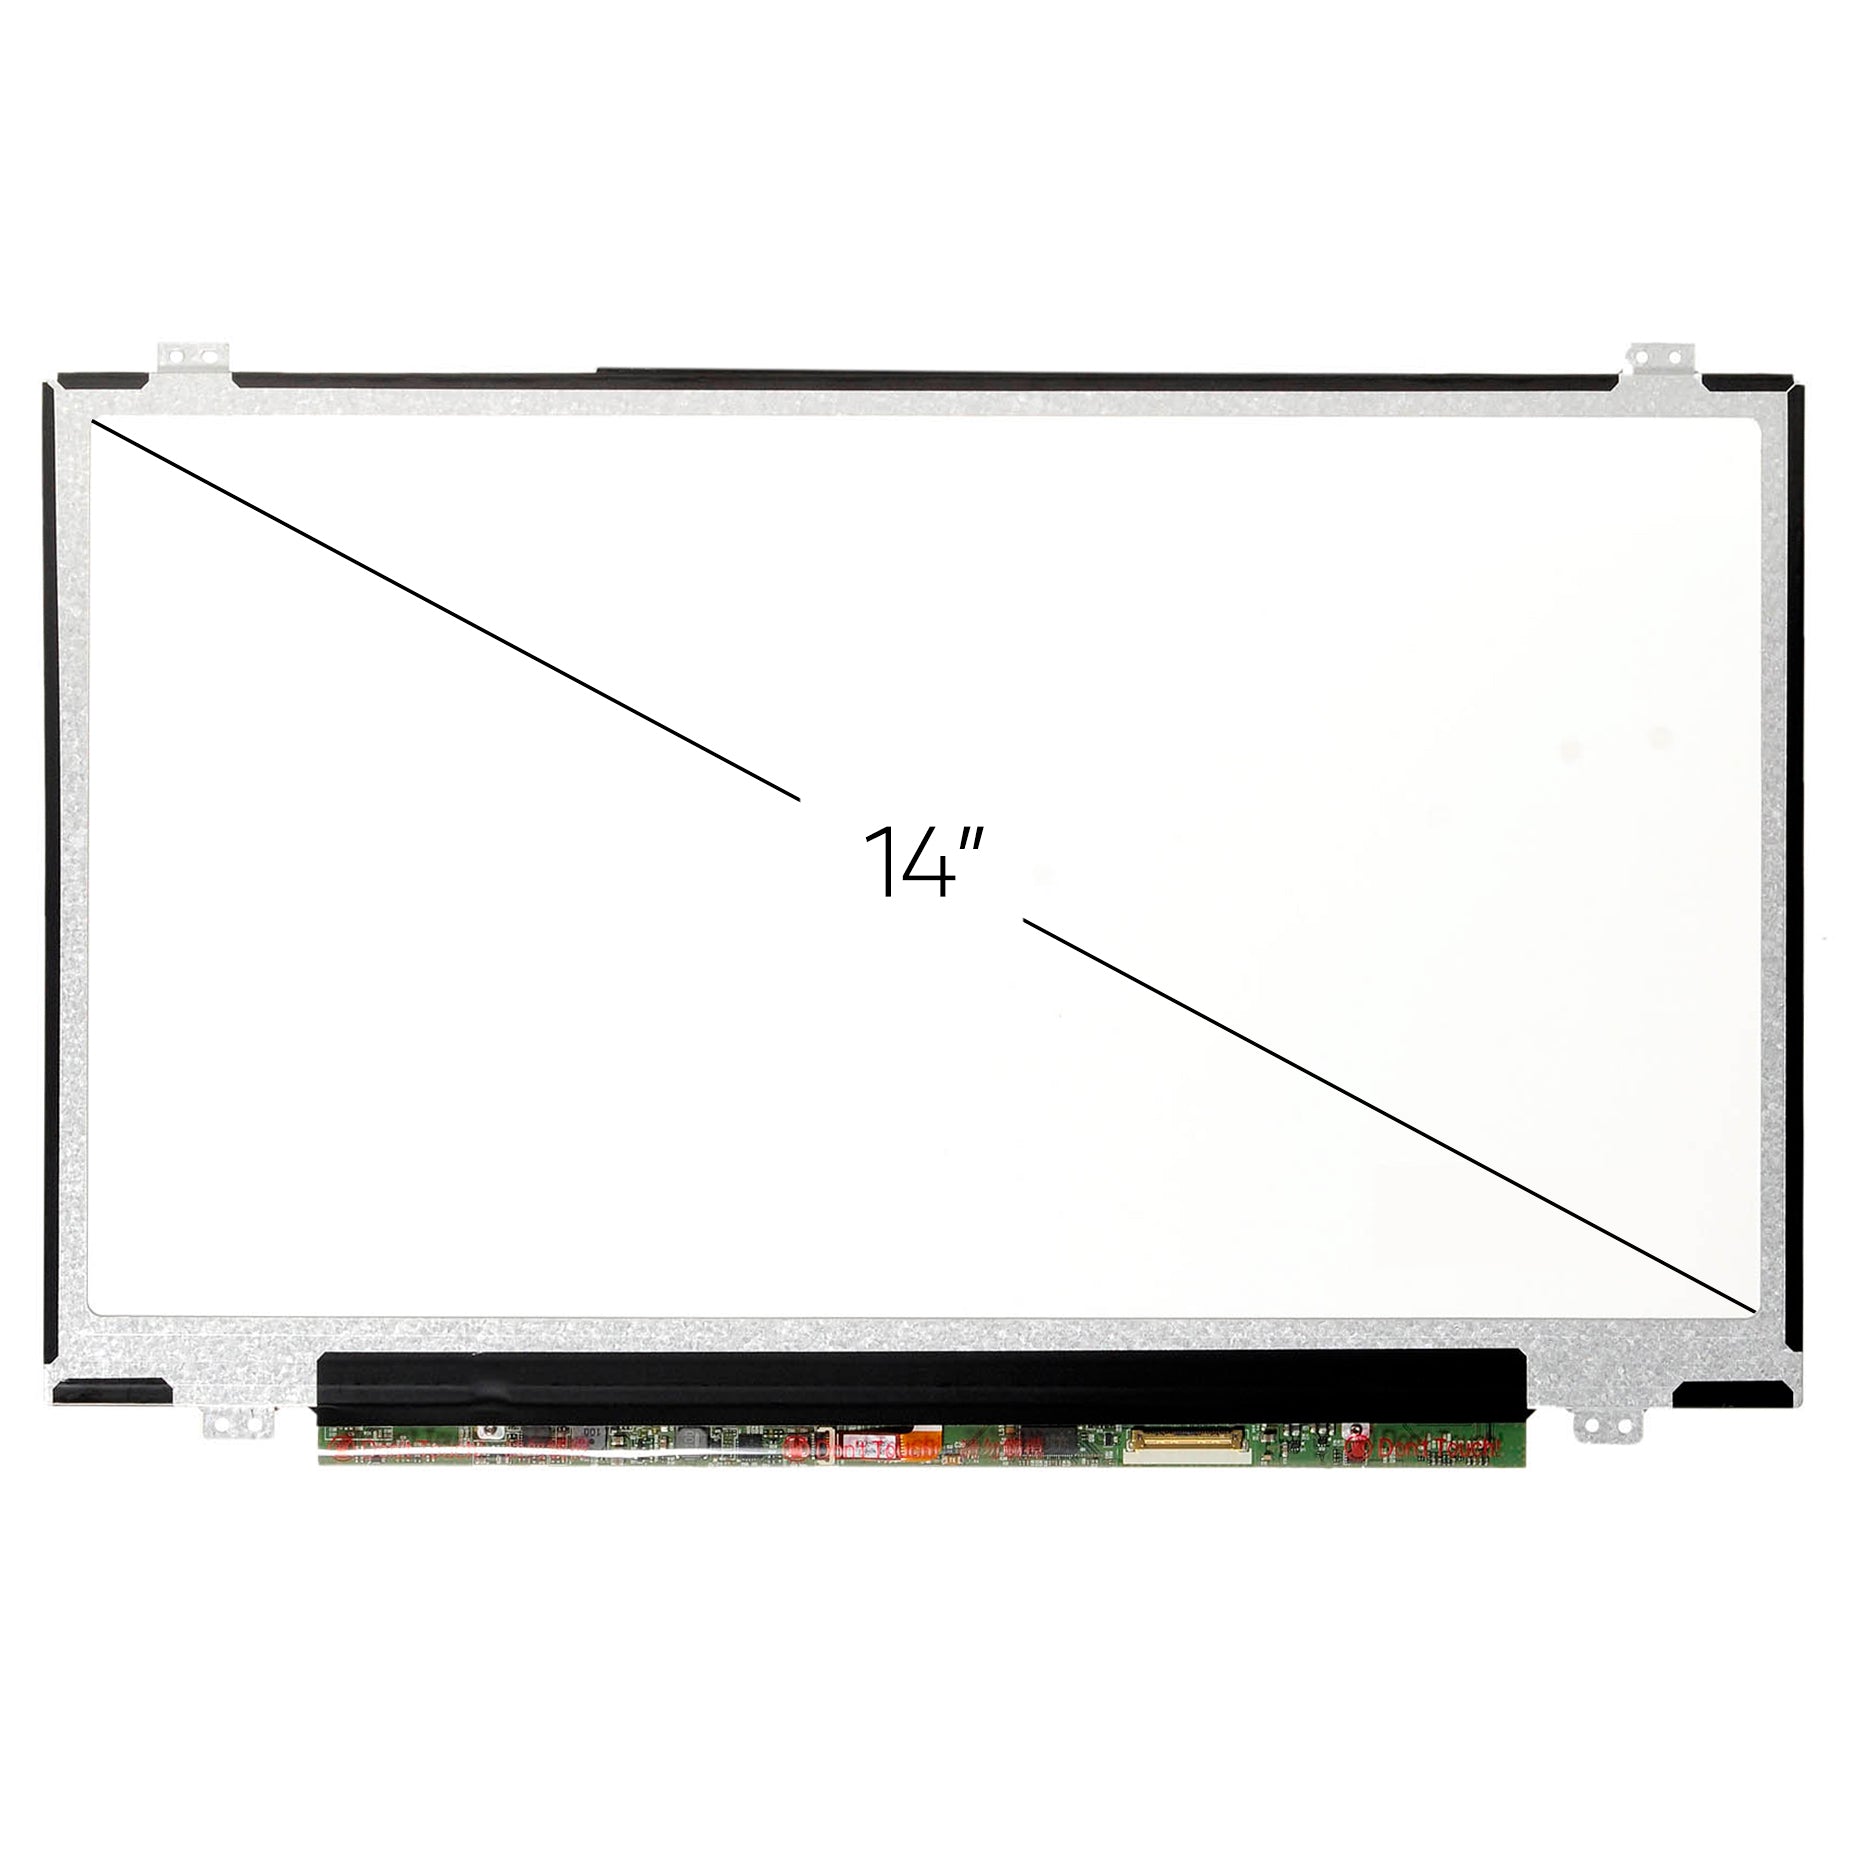 Screen Replacement for LP140WF6(SP)(D3) FHD 1920x1080 IPS Matte LCD LED Display